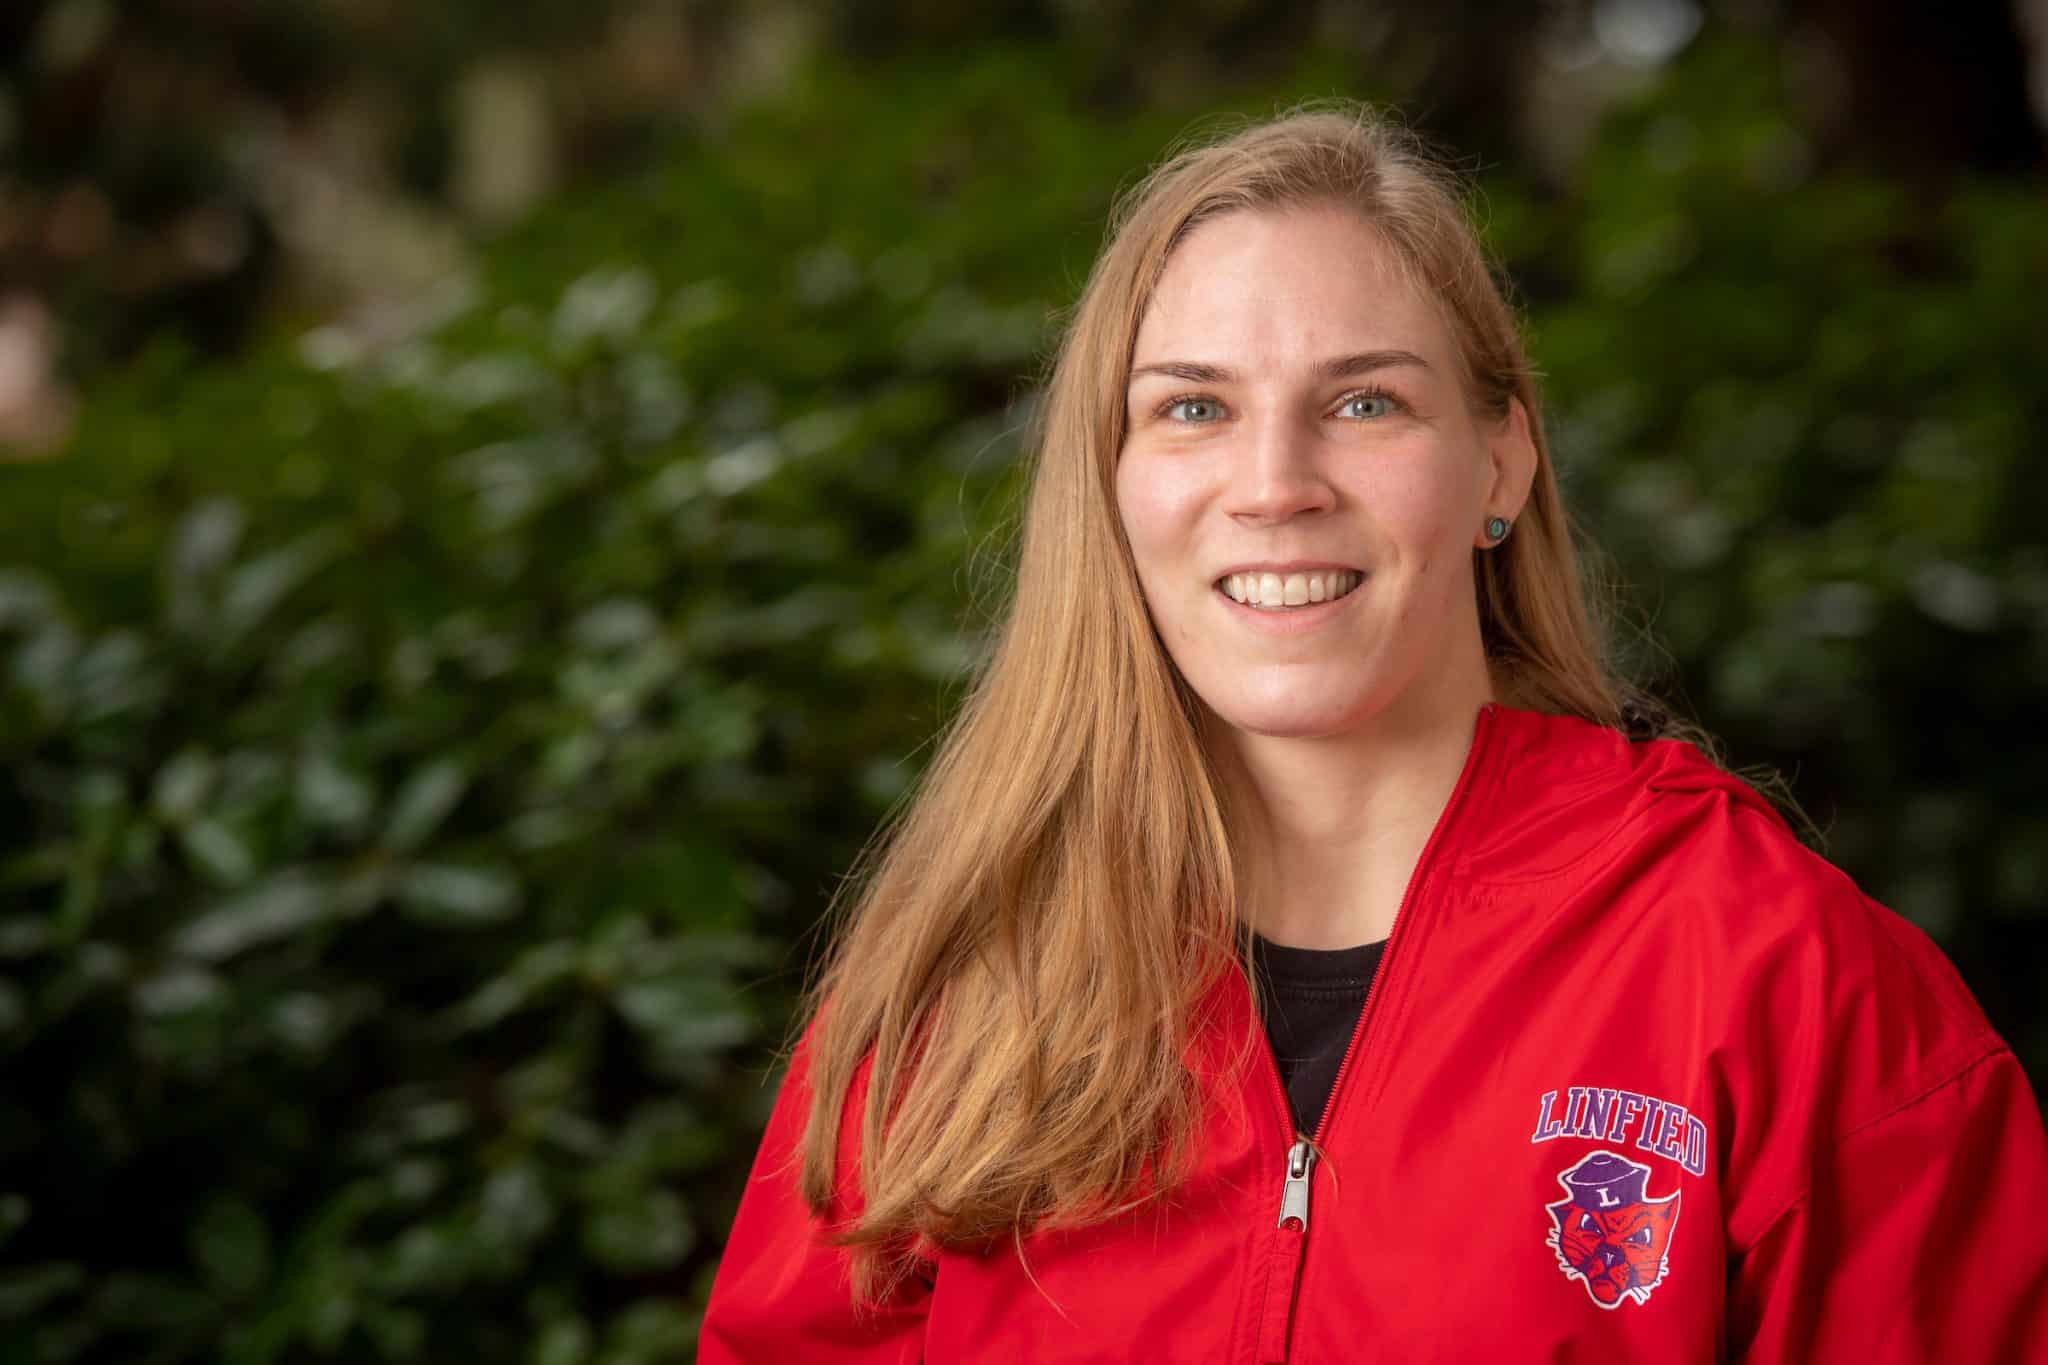 Tomahawk native Alyssa Lampe named assistant wrestling coach at Linfield University in Oregon